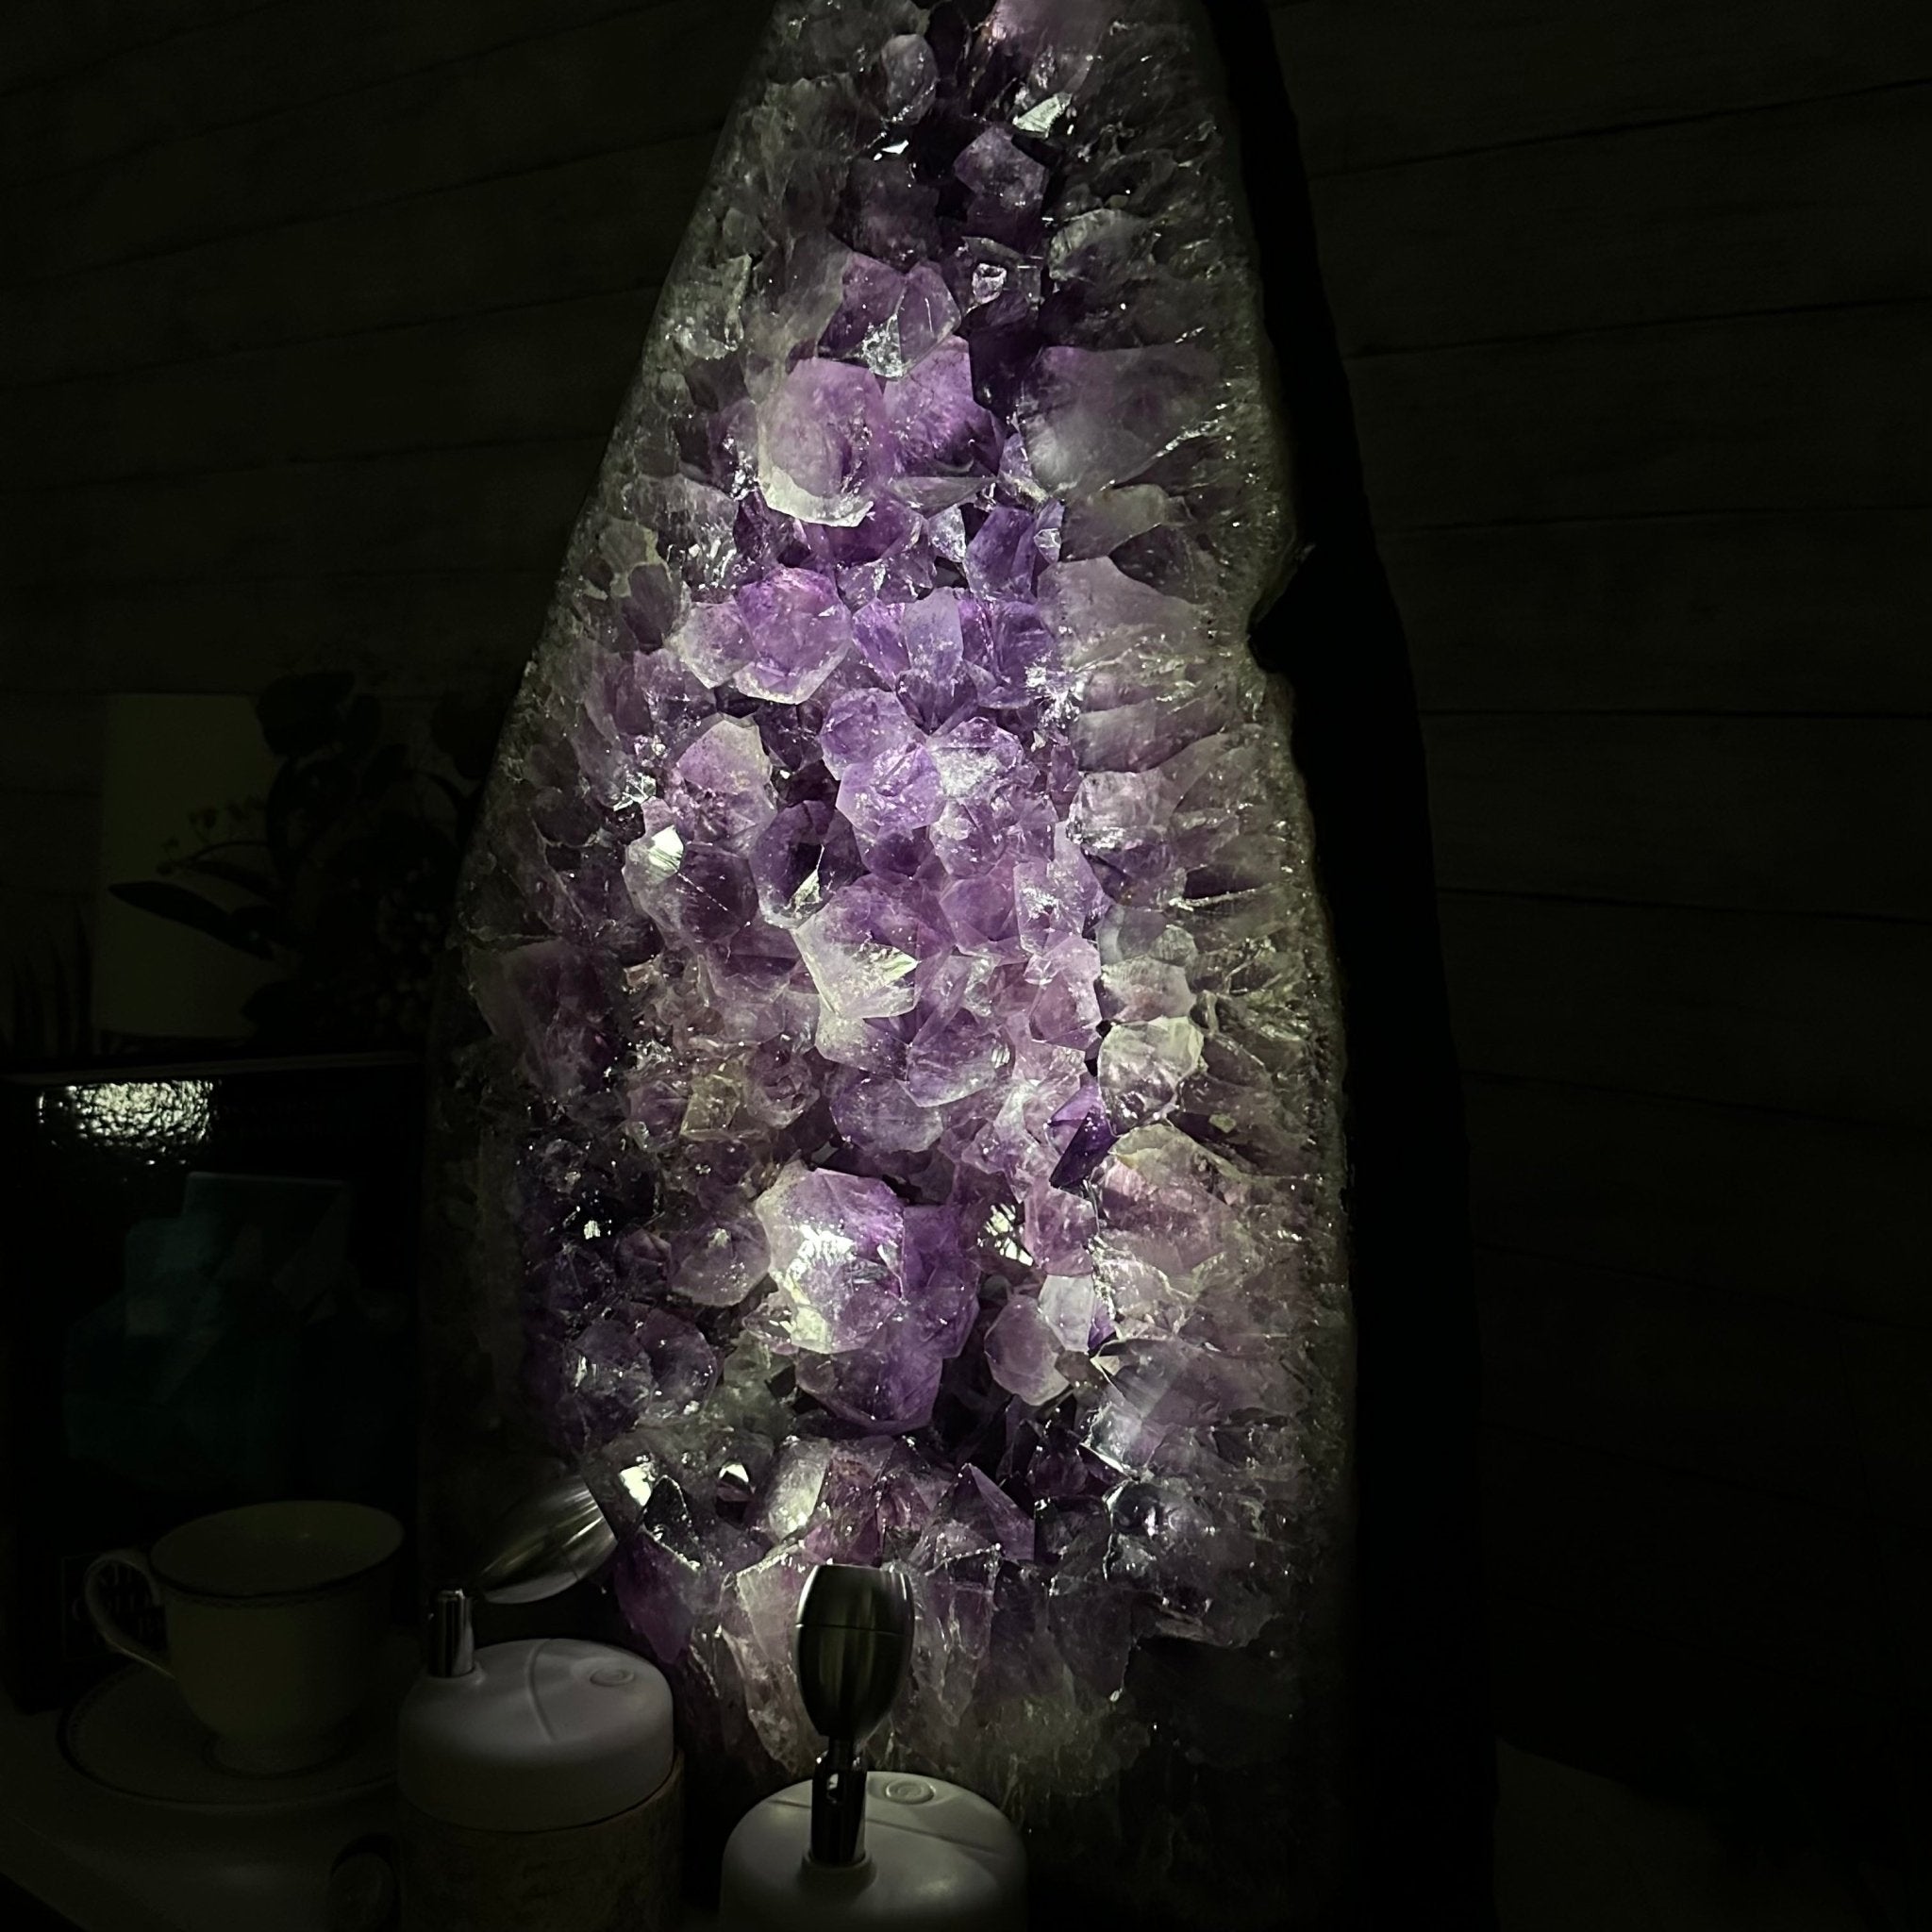 Extra Quality Brazilian Amethyst Cathedral, 108 lbs & 24.25" Tall, Model #5601-1183 by Brazil Gems - Brazil GemsBrazil GemsExtra Quality Brazilian Amethyst Cathedral, 108 lbs & 24.25" Tall, Model #5601-1183 by Brazil GemsCathedrals5601-1183